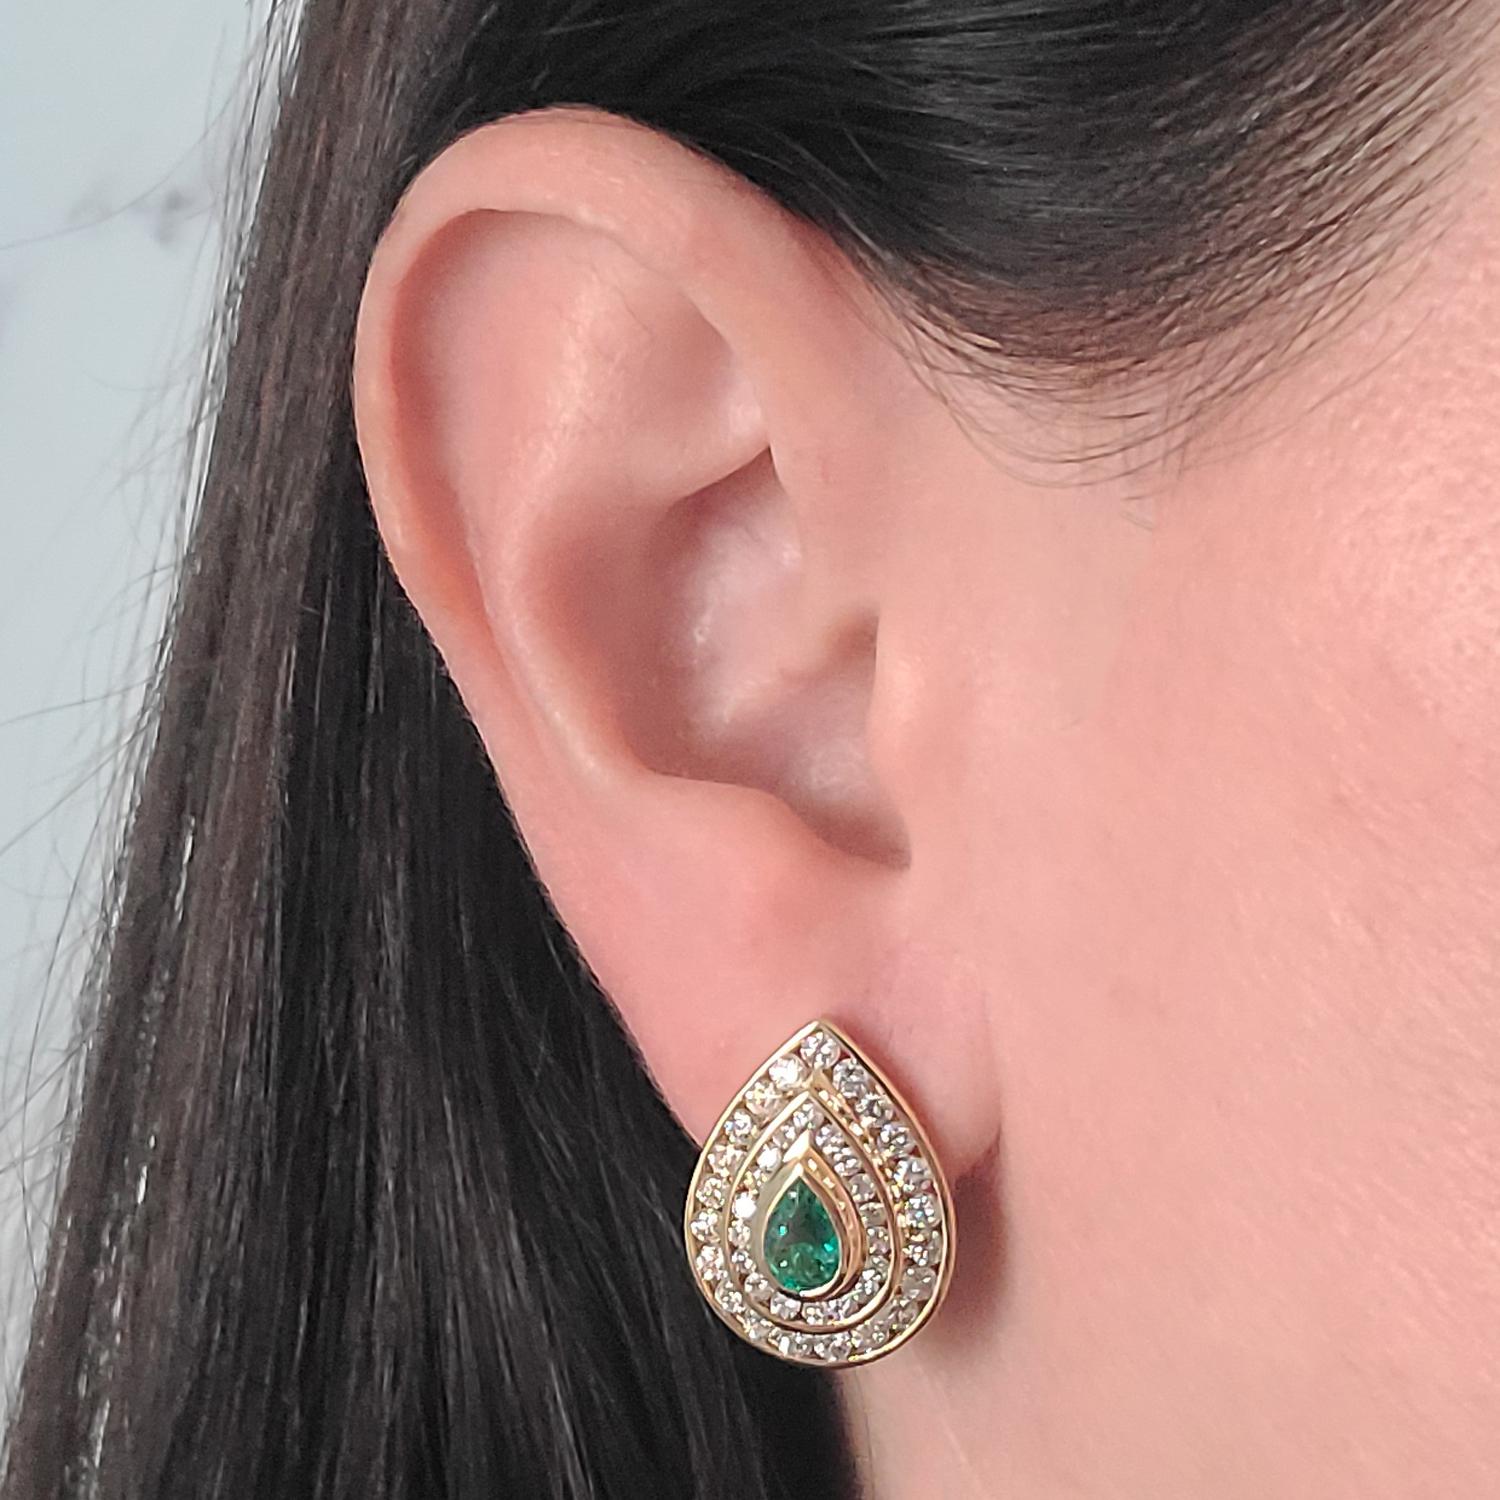 18 Karat Yellow Gold Pear Shaped Earrings Featuring 2 Bezel Set Emeralds Totaling Approximately 1.00 Carat Surrounded By 78 Channel Set Round Brilliant Cut Diamonds of SI Clarity and H Color Totaling An Additional 3.00 Carats. Pierced Post with